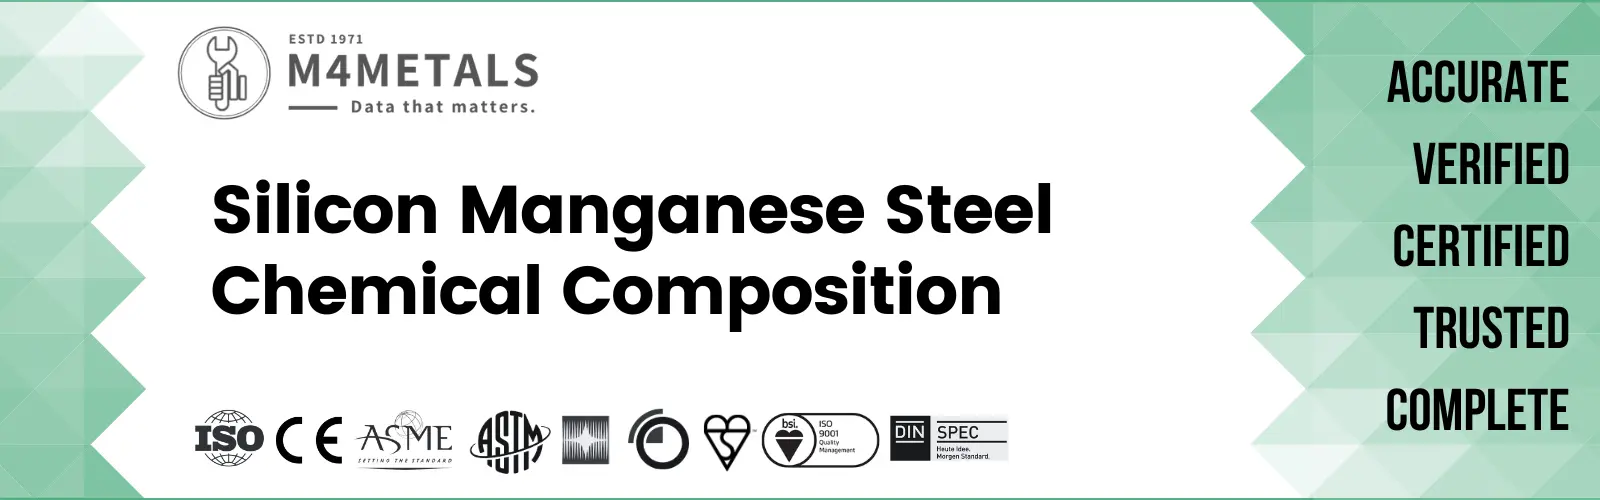 Silicon Manganese Steel Chemical Composition